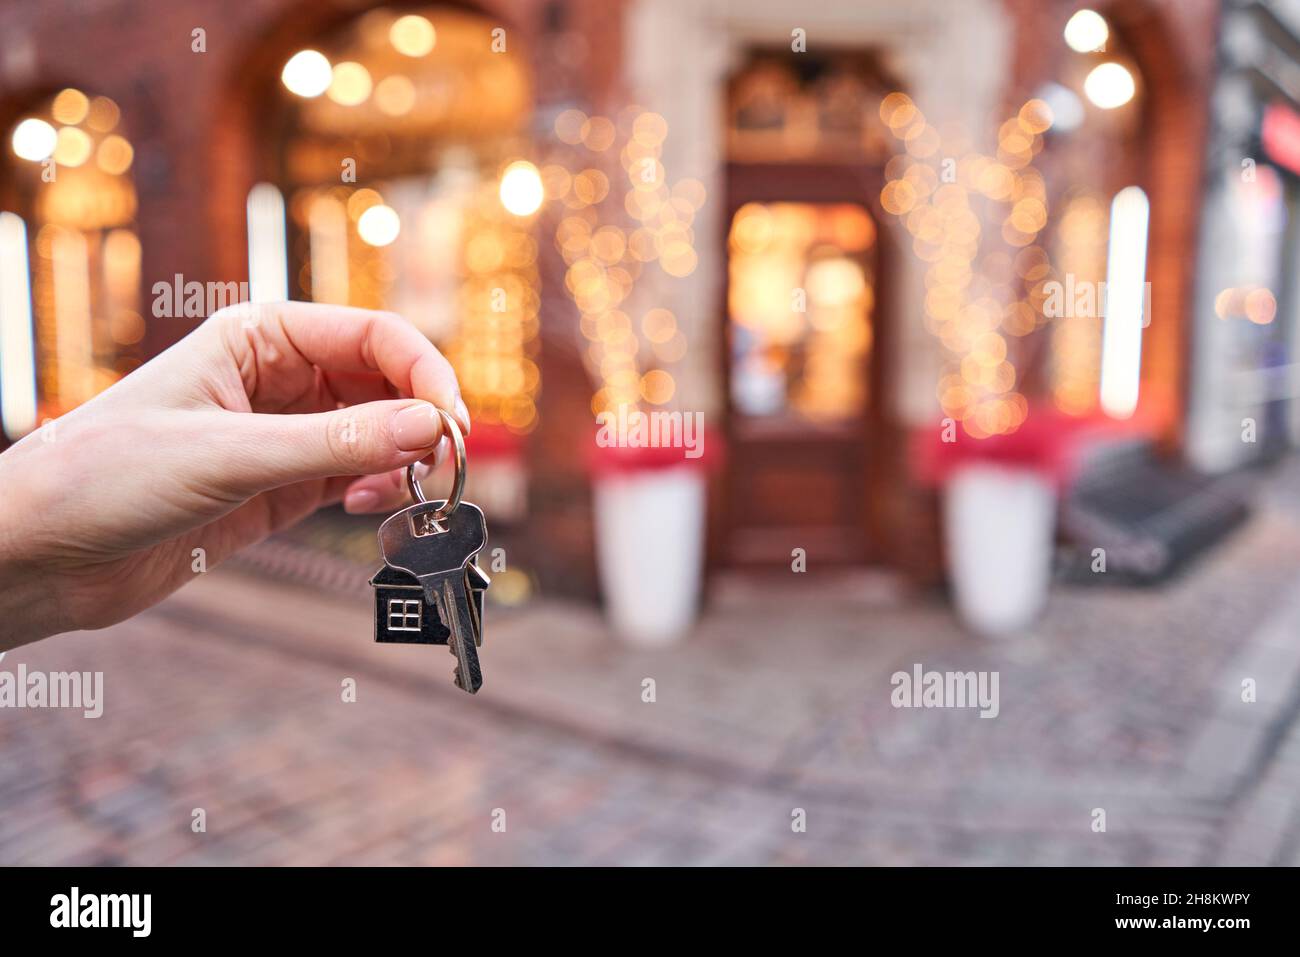 Mortgage or rent concept. Woman holding key with wooden house keychain . Real estate, hypothec, moving home or renting property. Christmas mood in blu Stock Photo